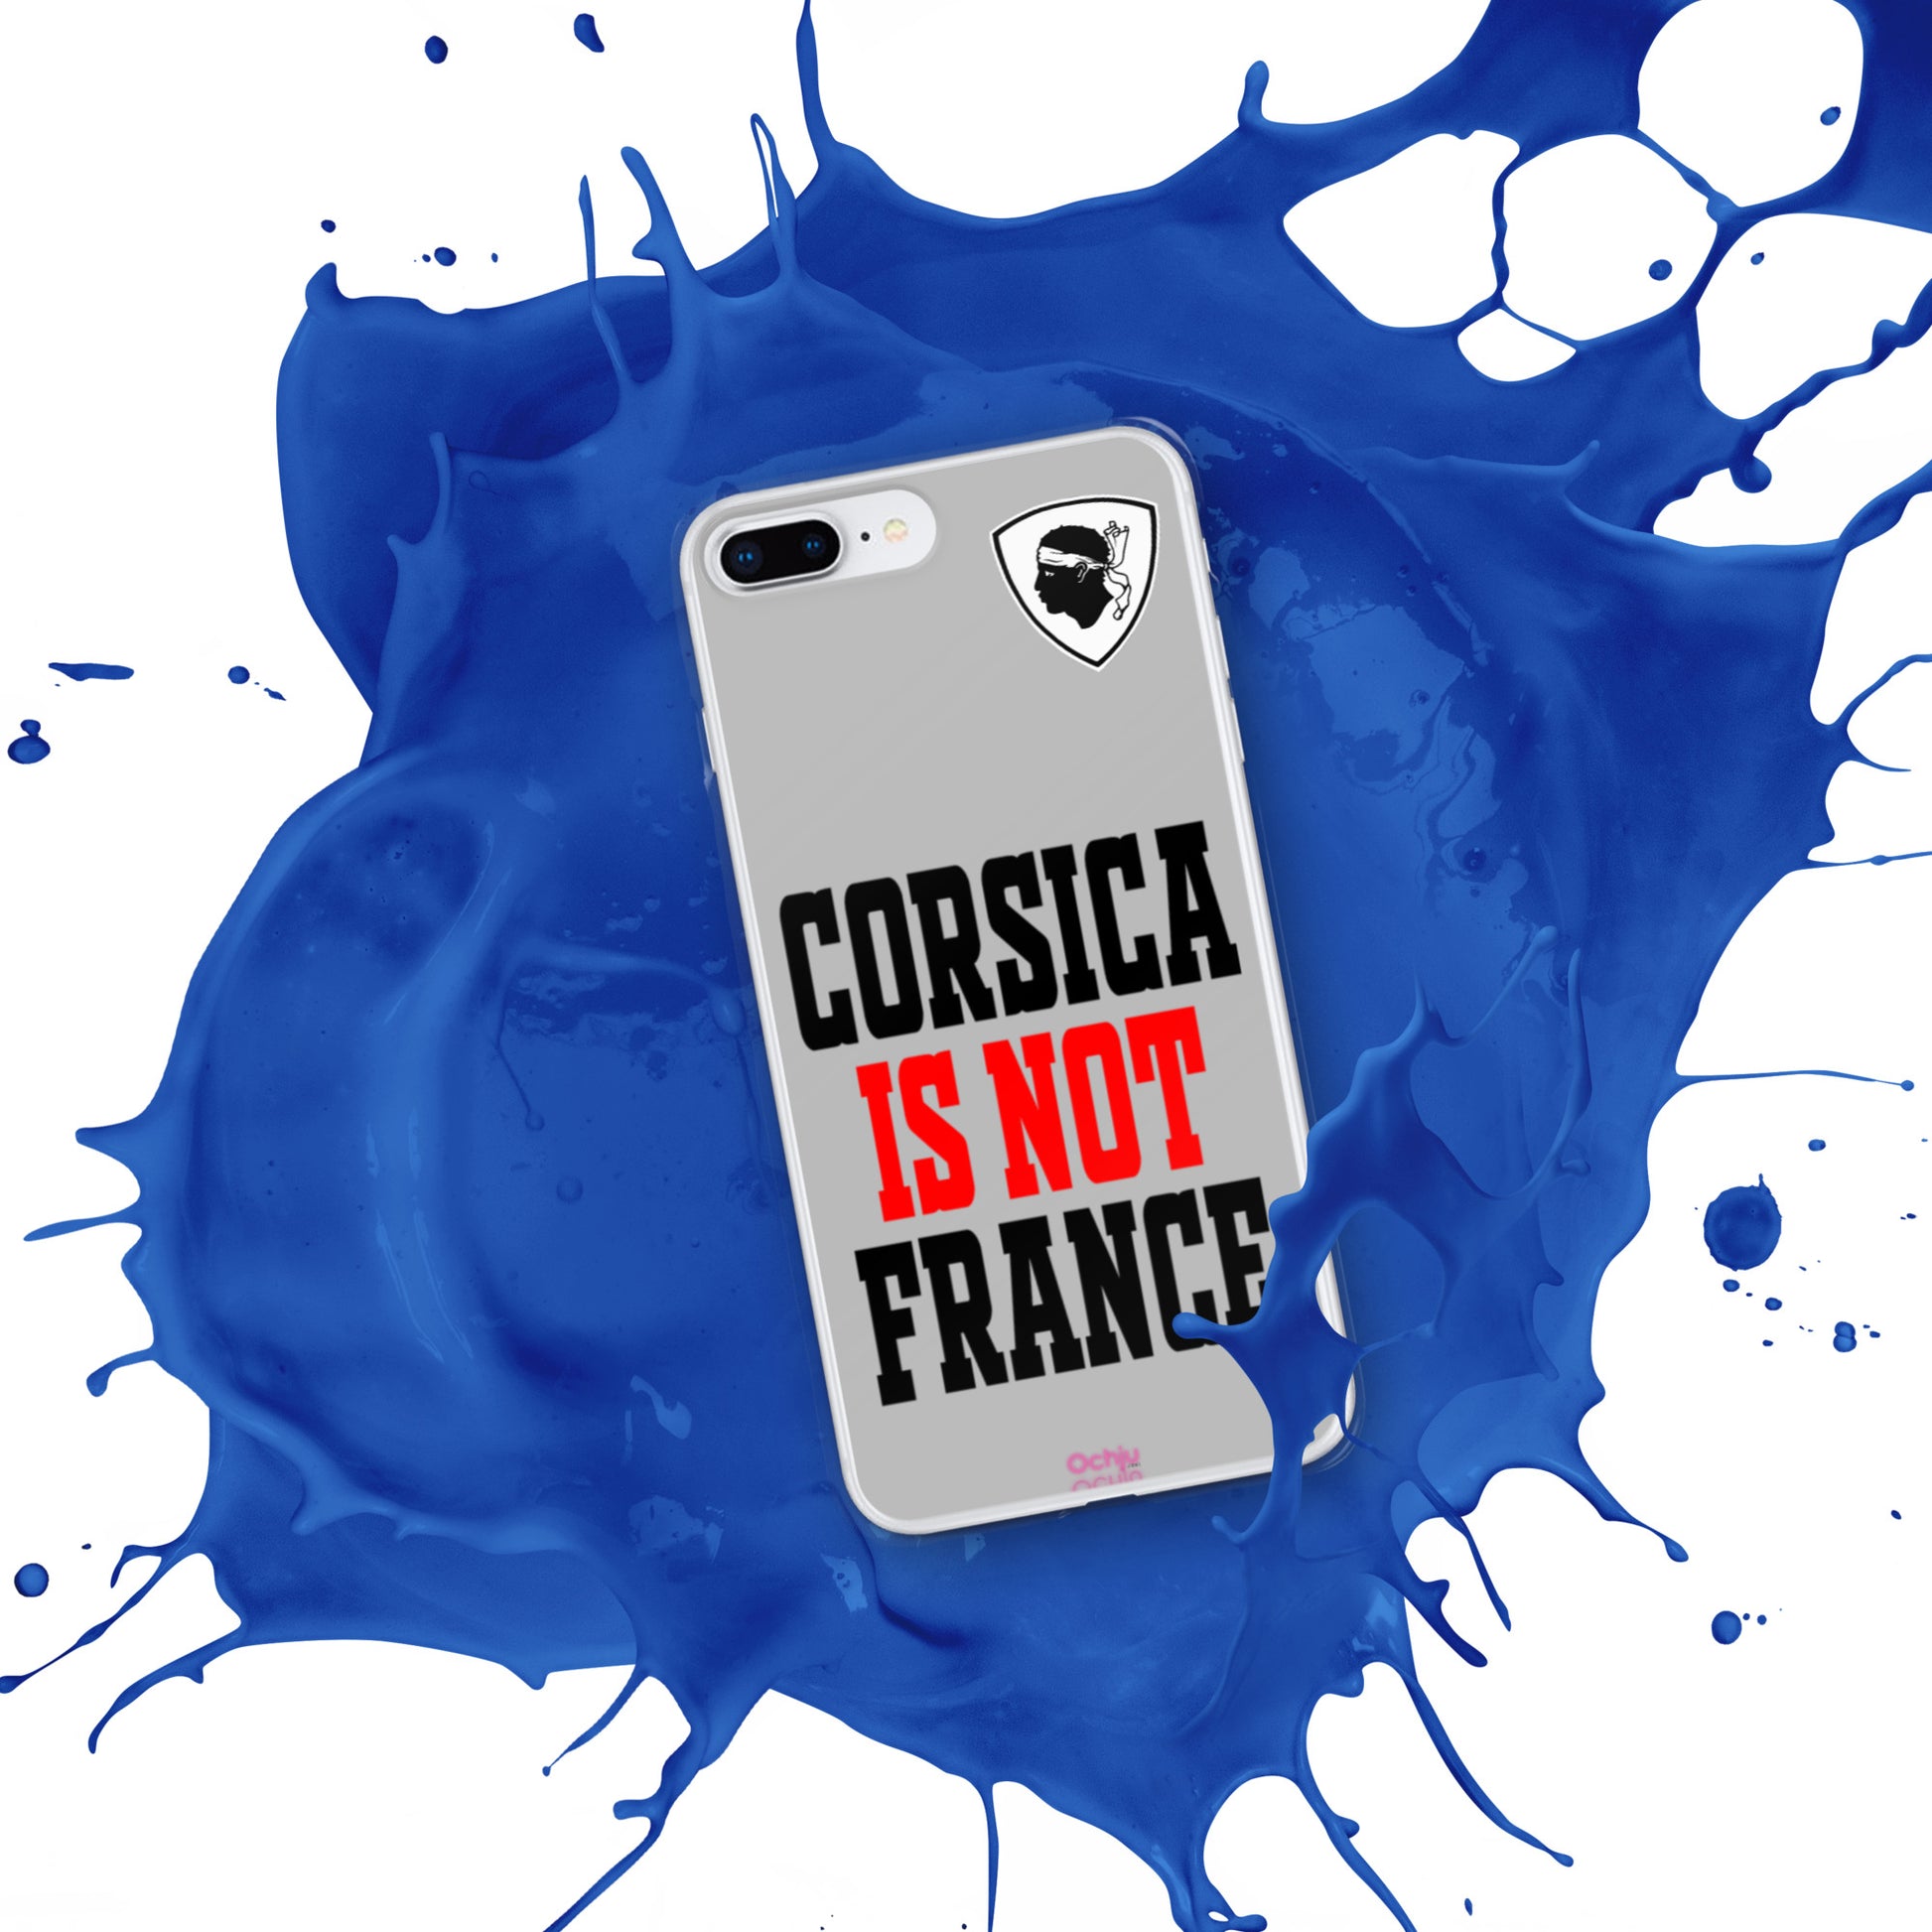 Coque pour iPhone Corsica is not France - Ochju Ochju iPhone 7 Plus / 8 Plus Ochju Coque pour iPhone Corsica is not France